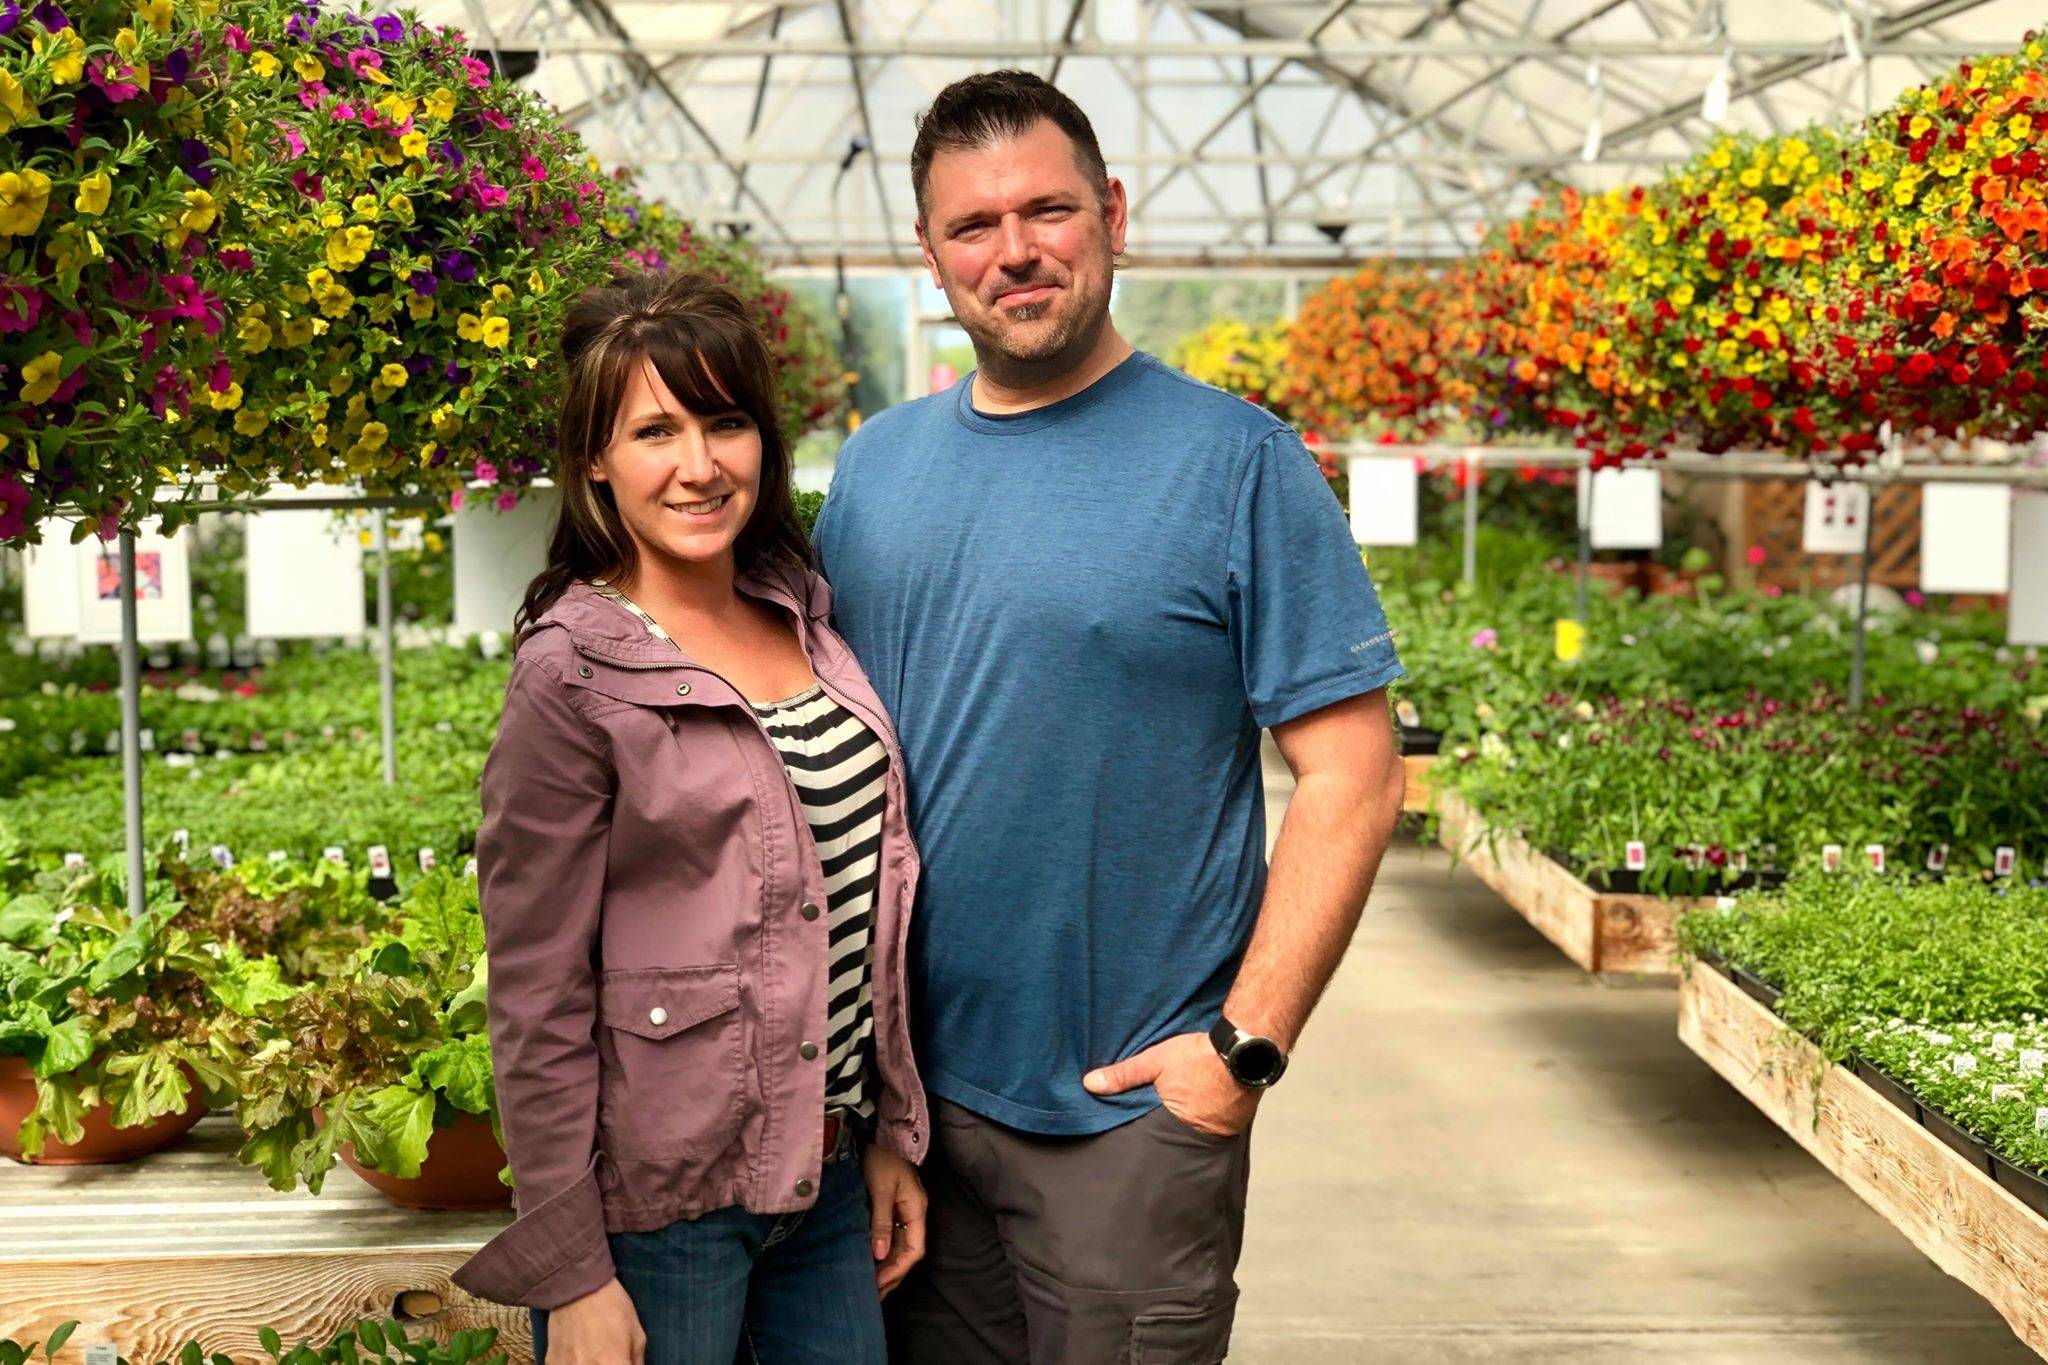 Jessica and Darren Henry, who bought Trinity Greenhouse from the longtime owners in early 2018, are pictured on Monday, June 3, 2019, near Kenai, Alaska. (Photo by Victoria Petersen/Peninsula Clarion)